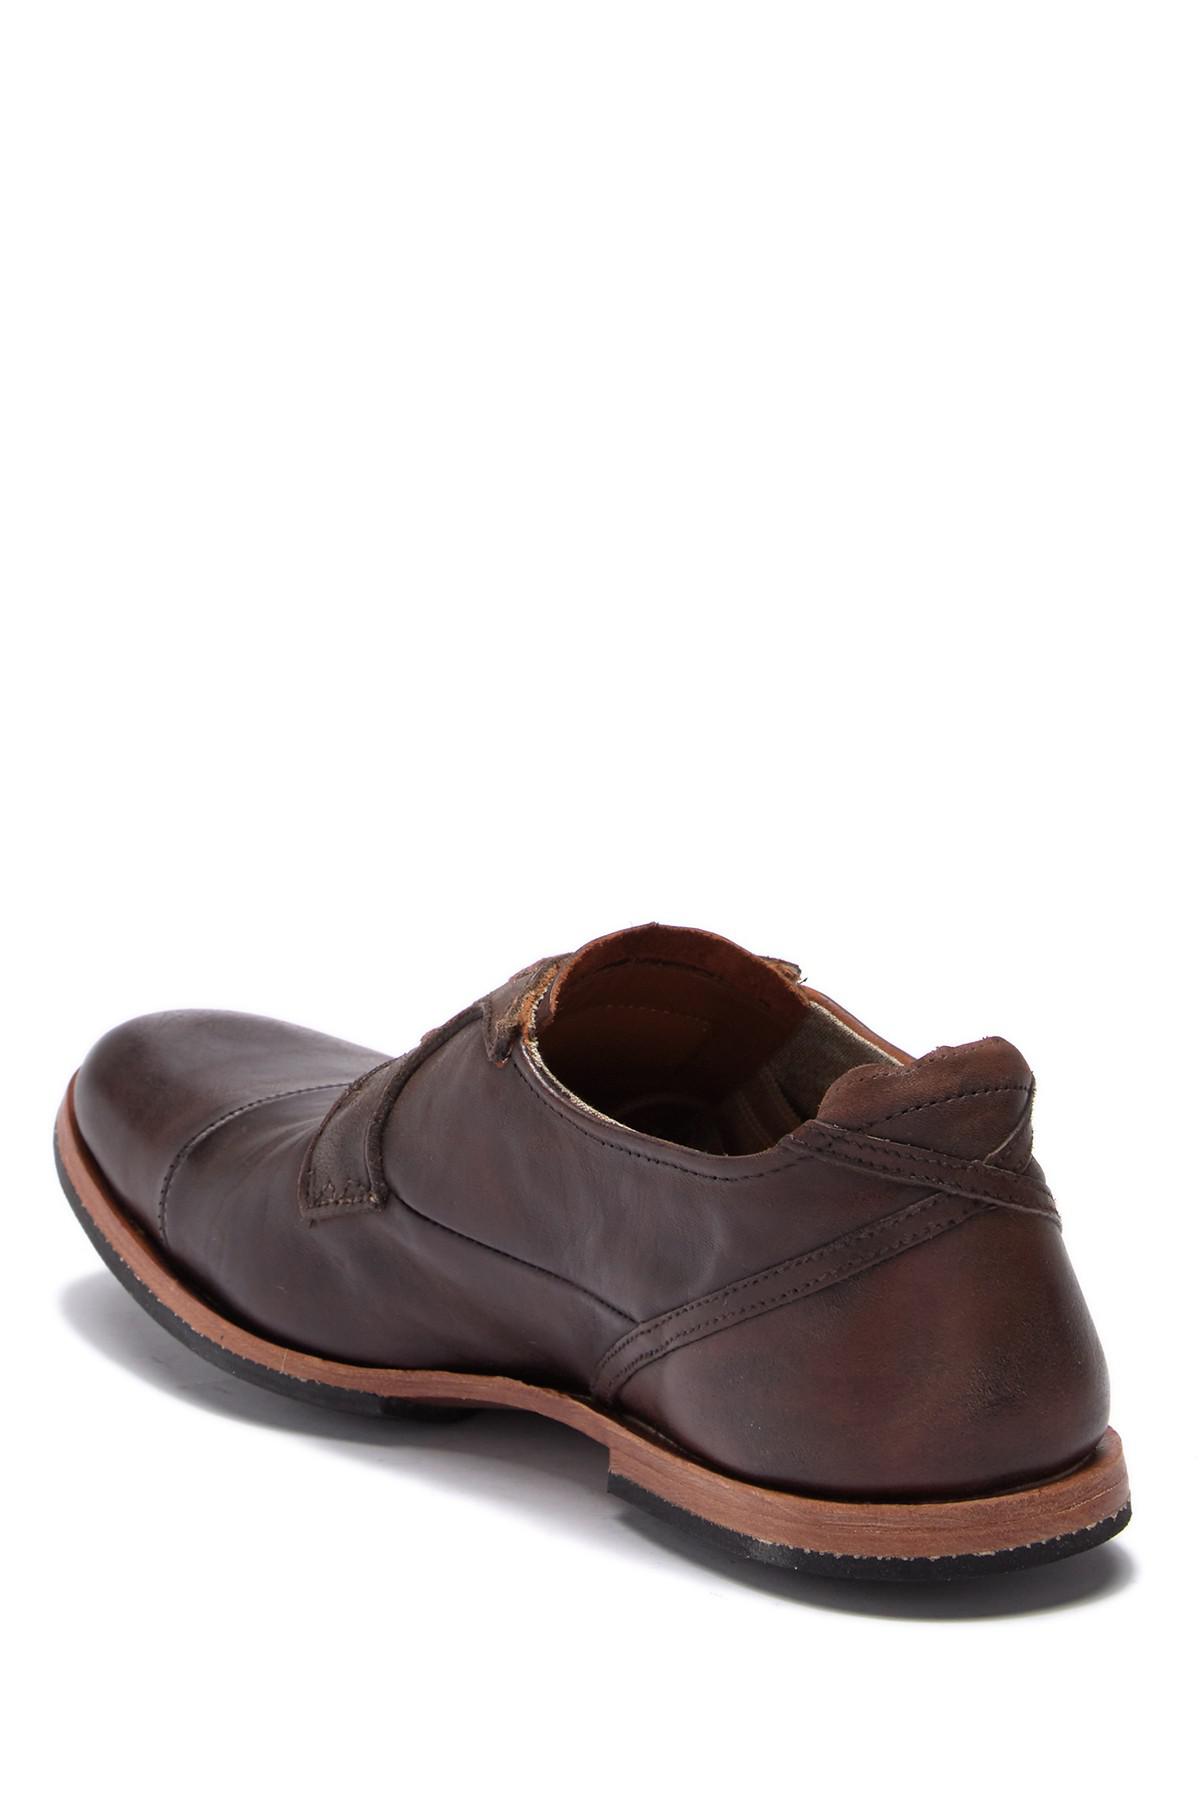 timberland wodehouse leather cap toe derby